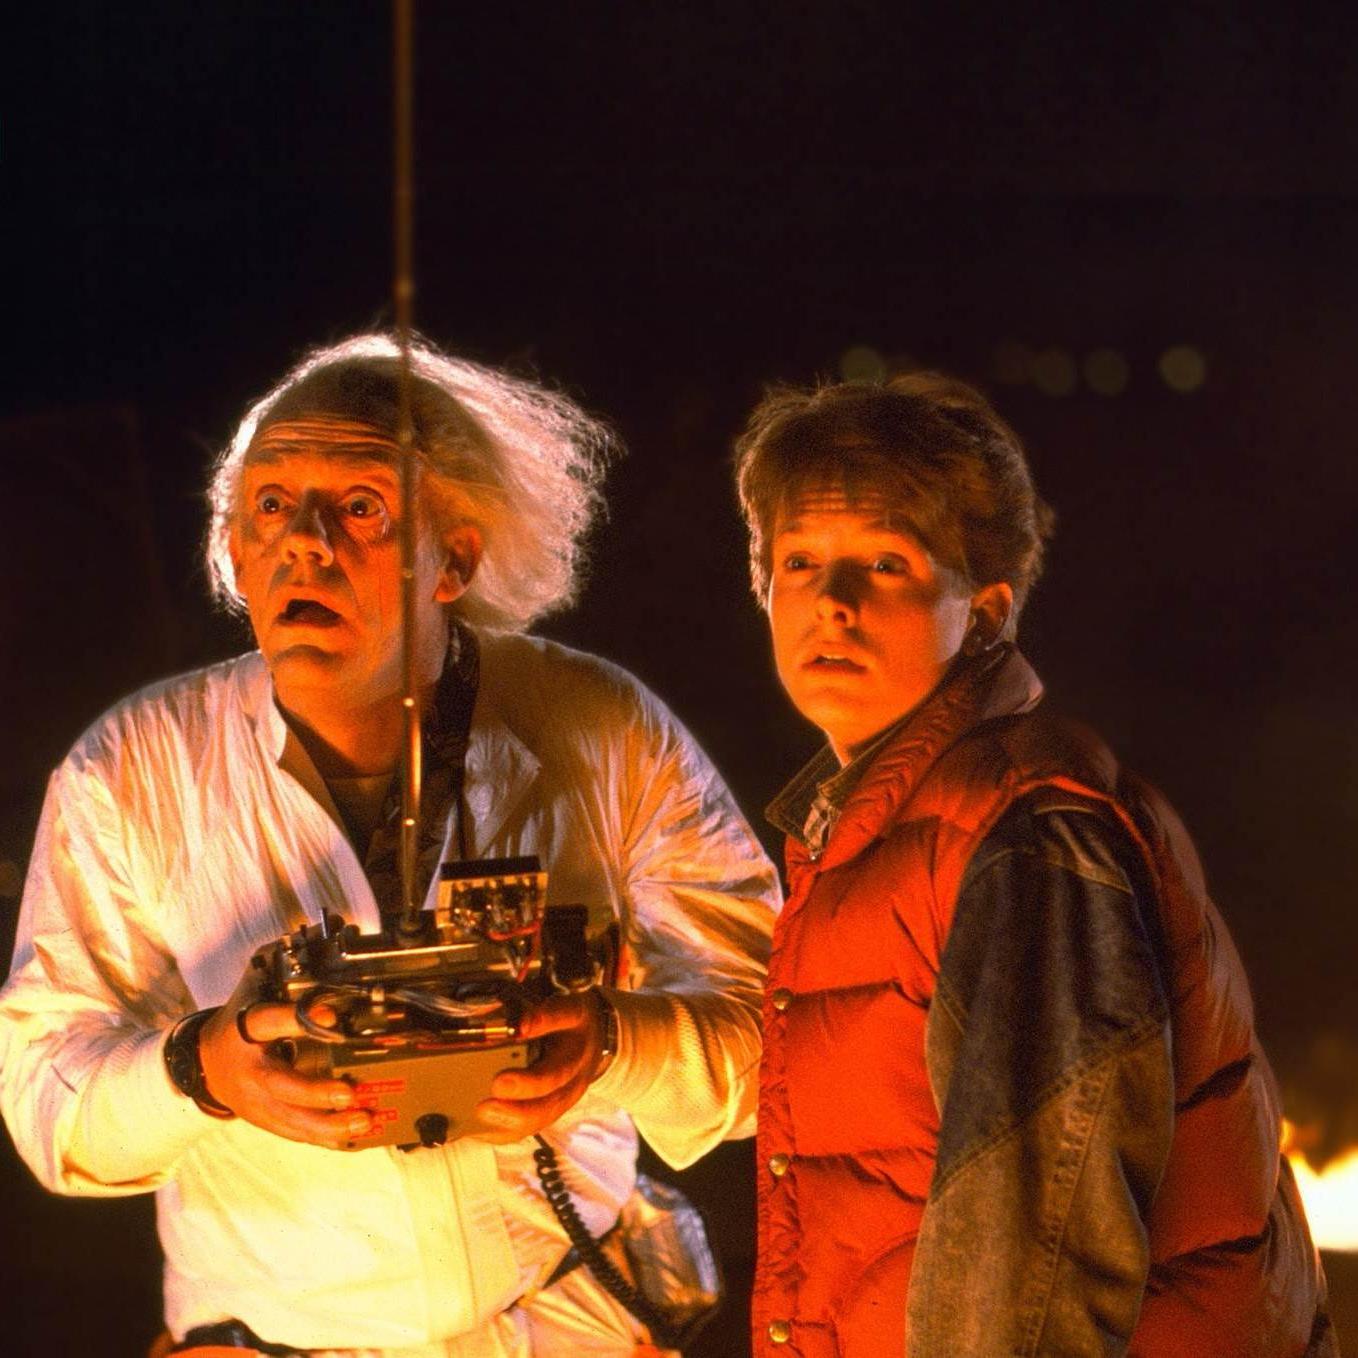 		Two actors in a scene from the movie "Back to the Future"
	